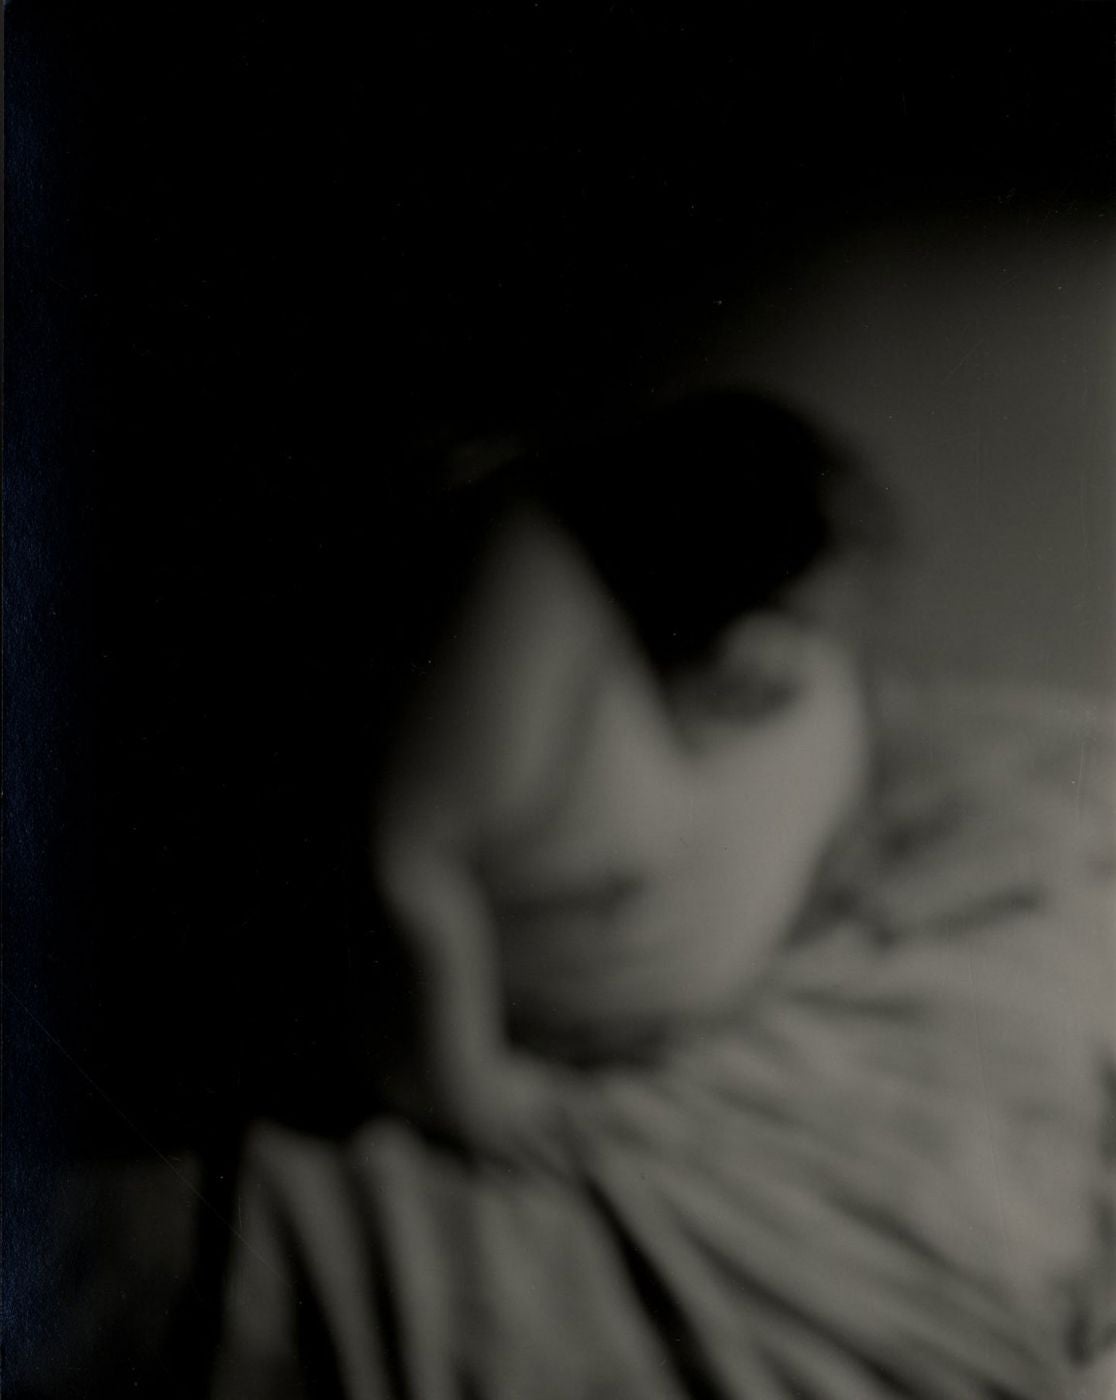 Andrea Modica: Barbara, Special Limited Edition (with Gelatin Silver Print)